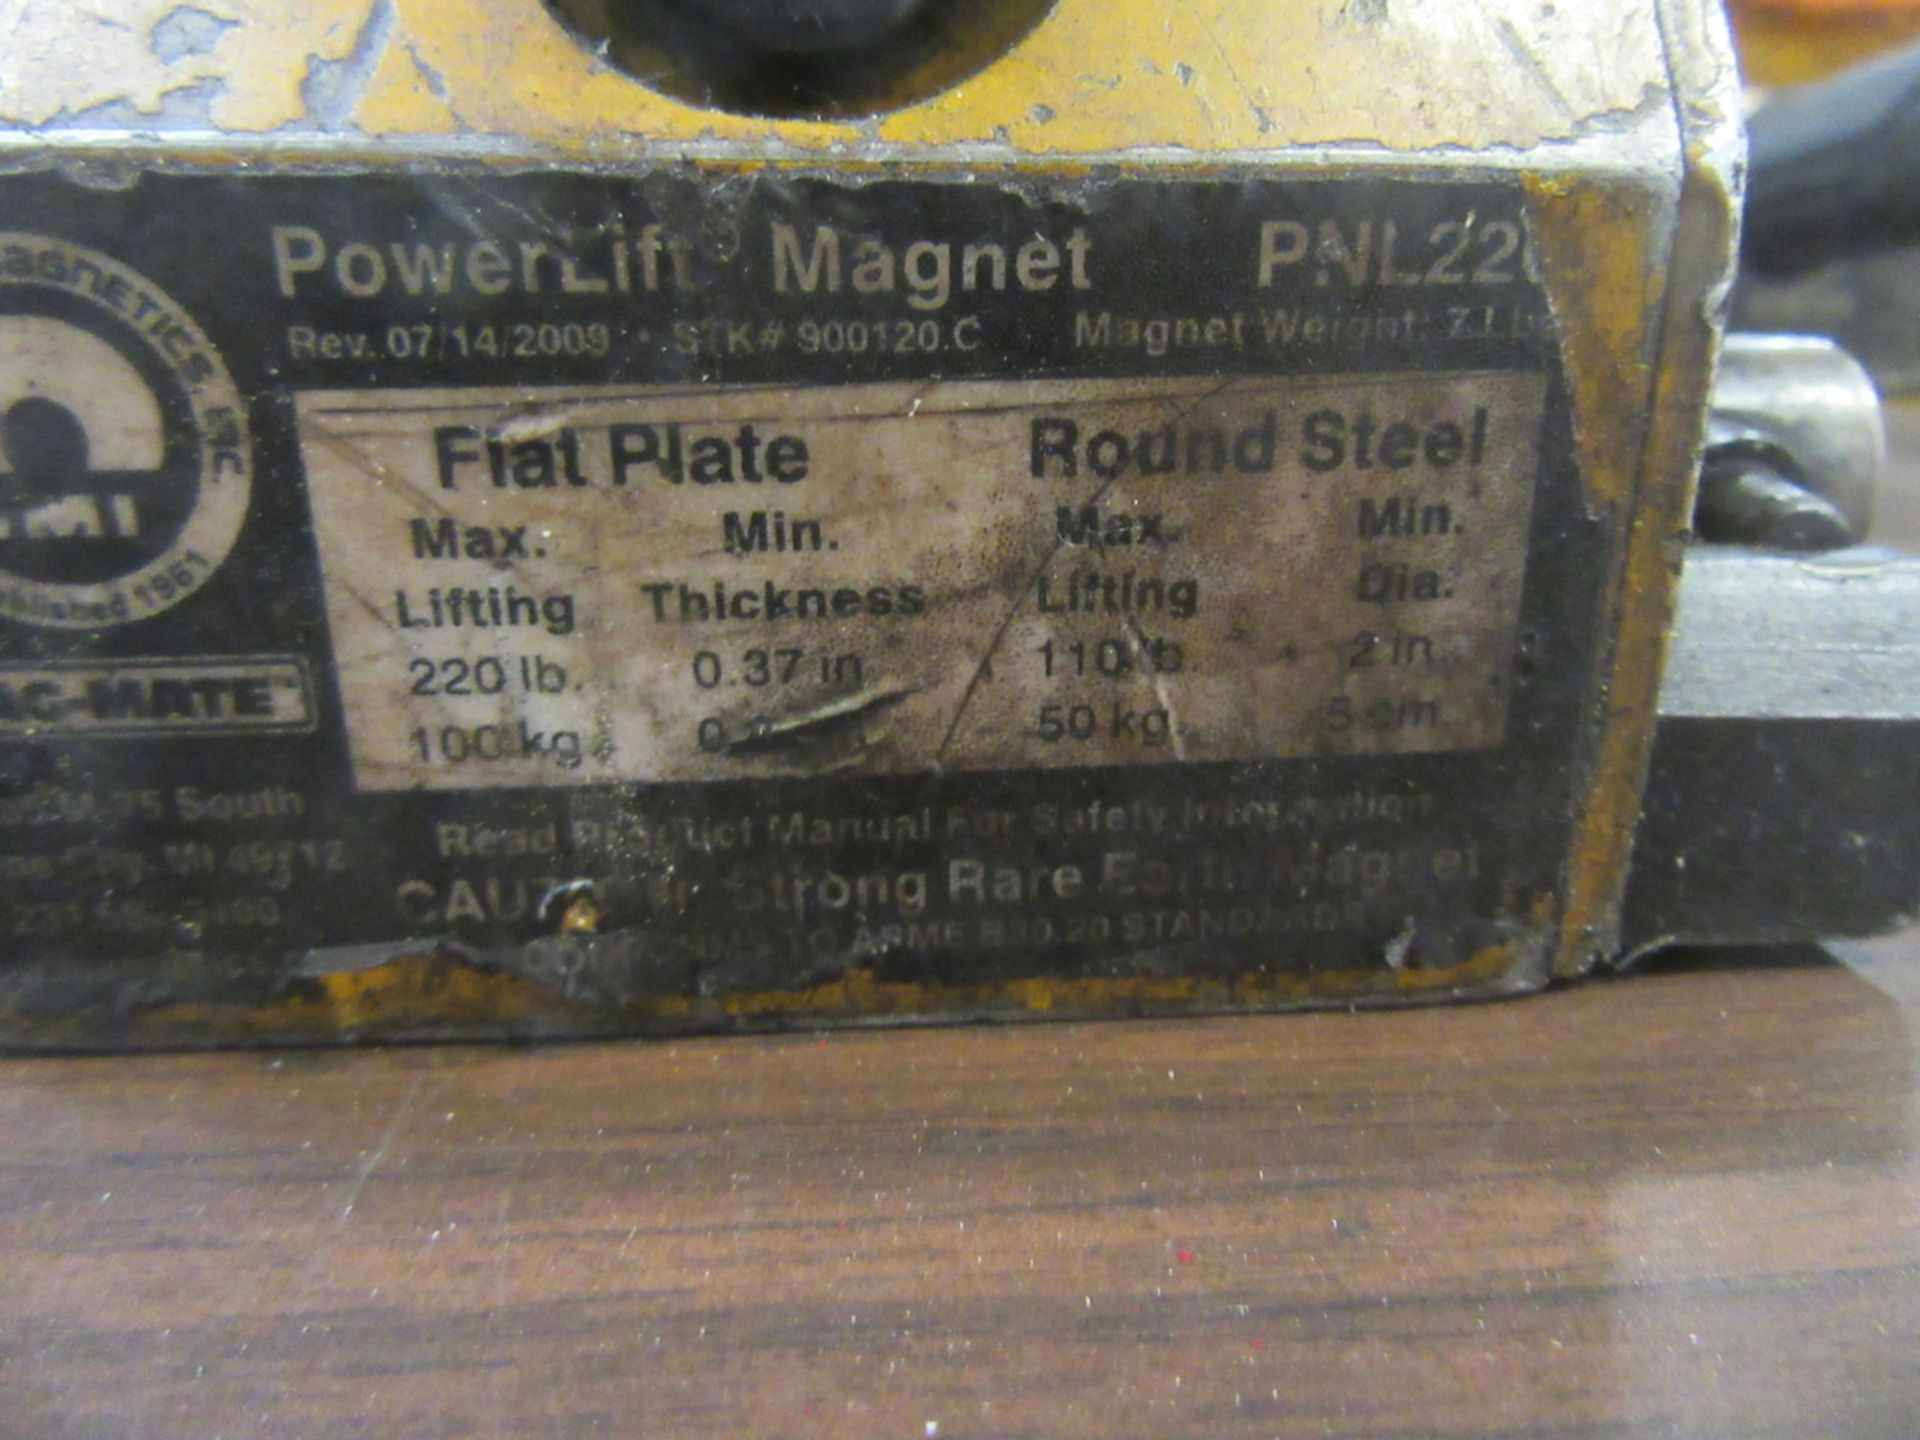 Mag-Mate PNL220 Powerlift Magnet - Image 2 of 3